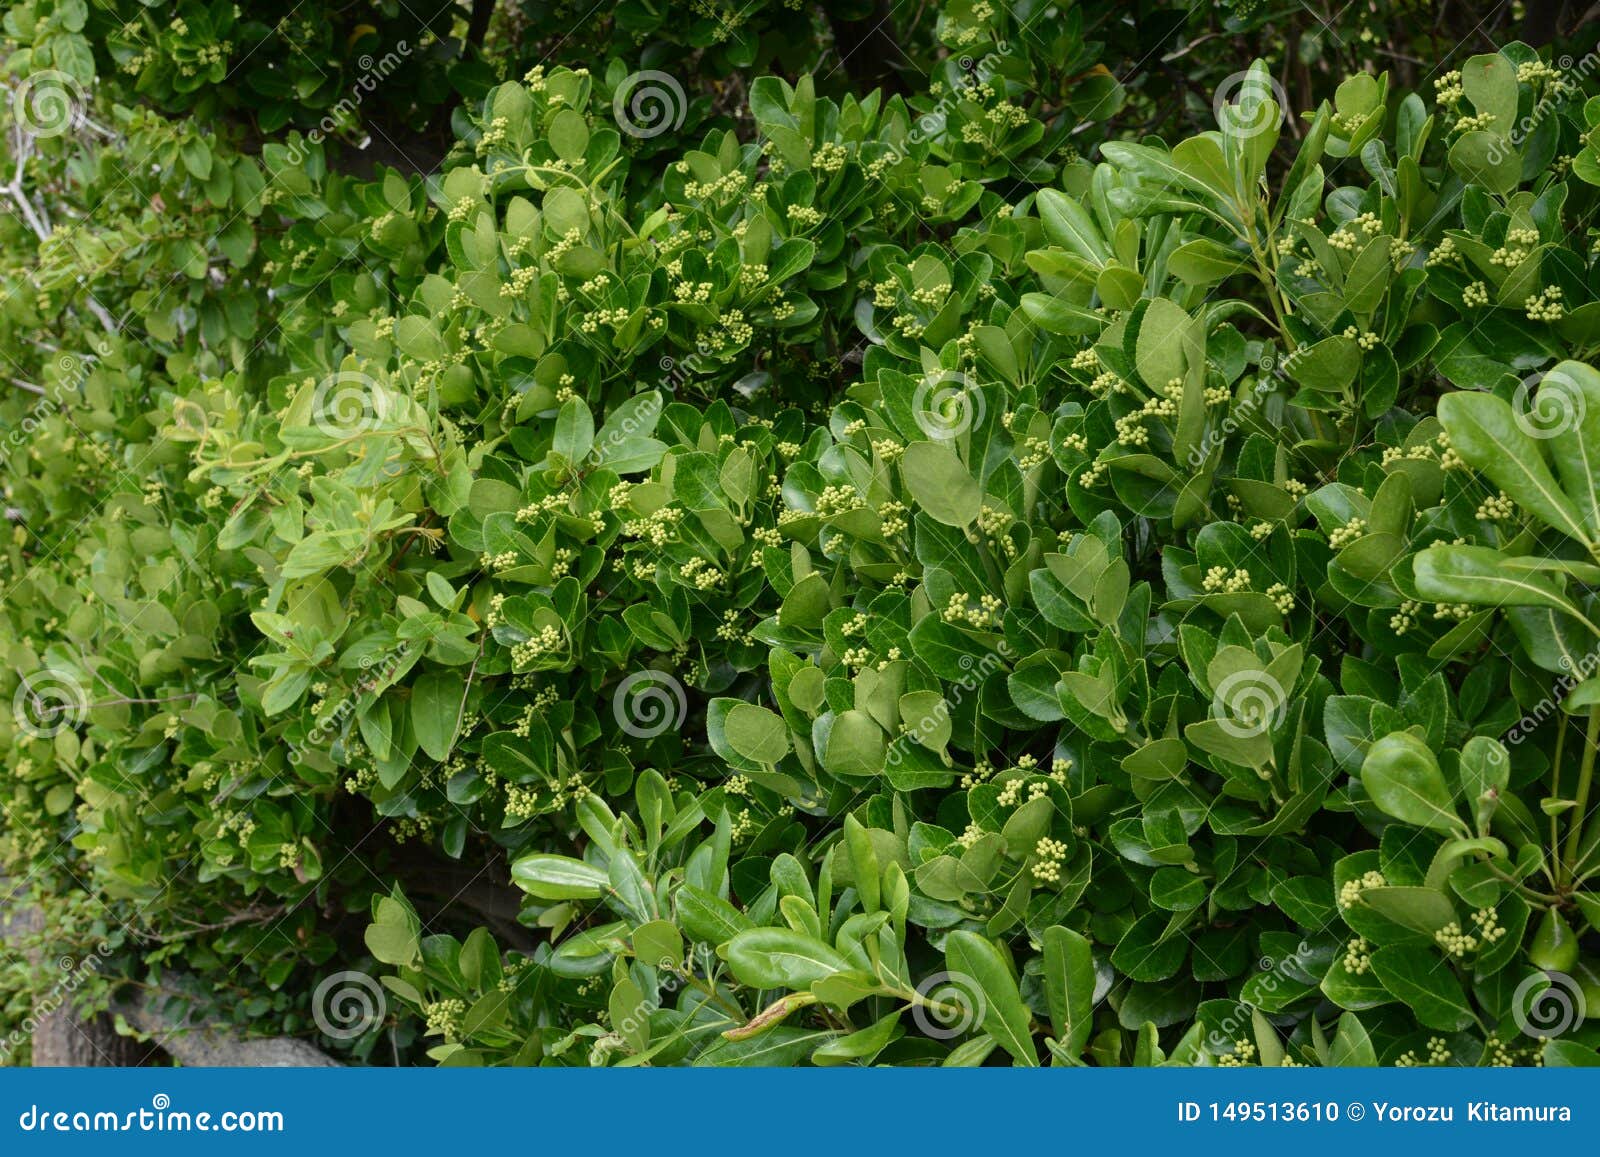 Japanese Spindle Tree Euonymus Japonica Stock Photo Image Of Japanese Closeup